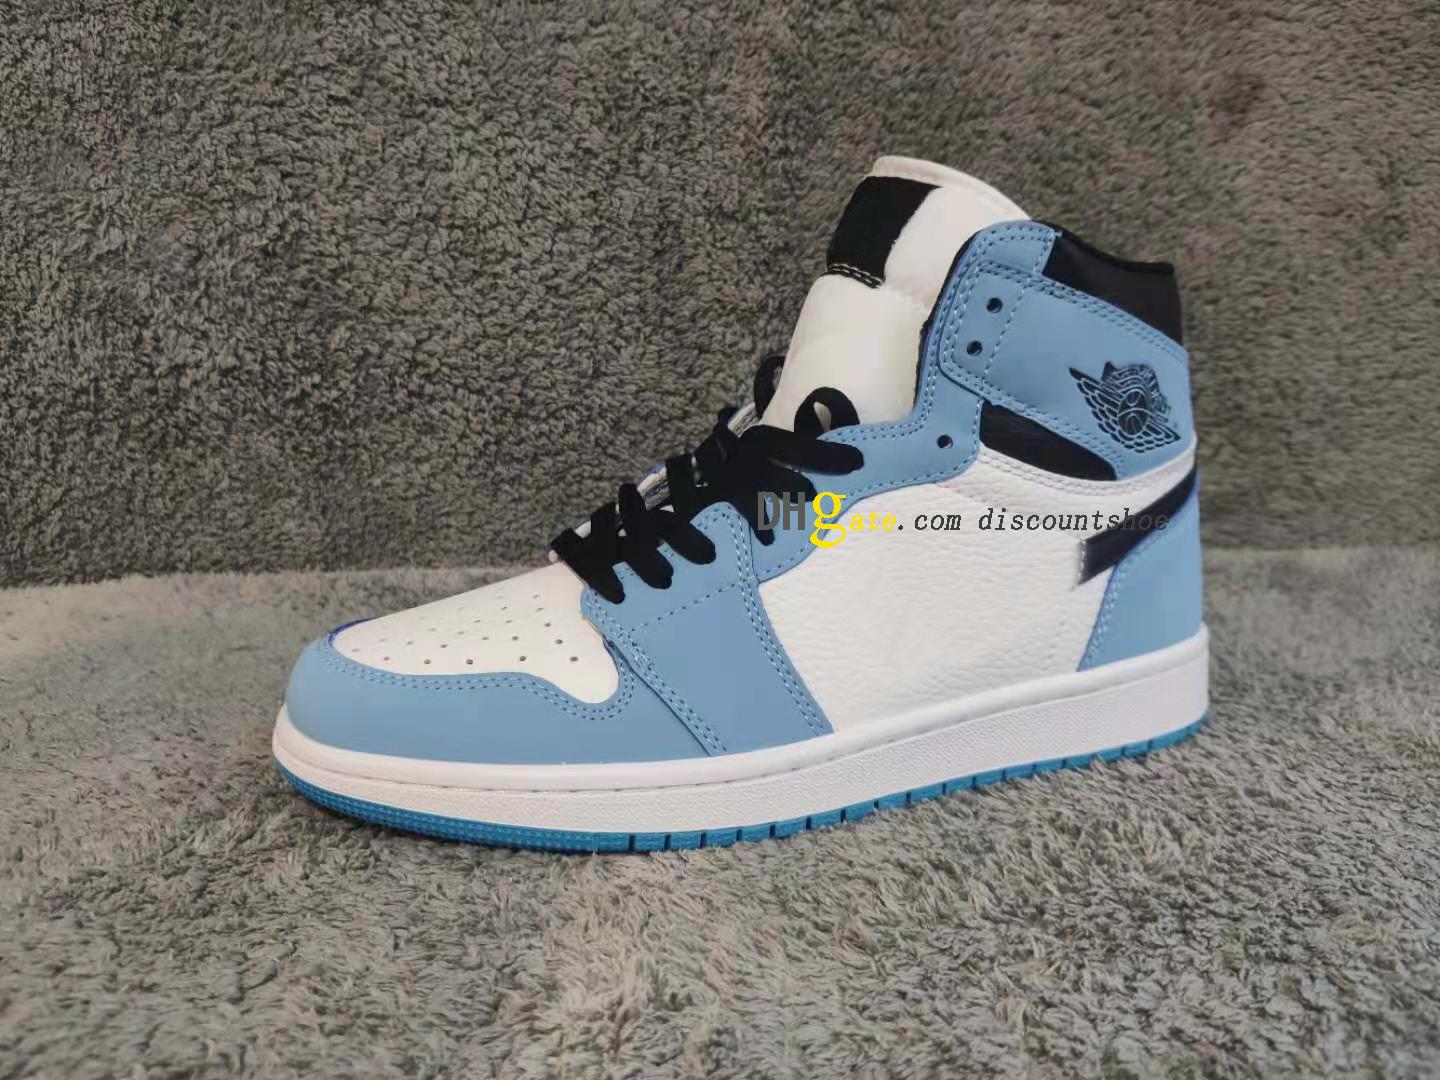 

1 High OG University Blue Basketball shoes 1s Mens Womens shoe Sneakers for size 36-46 555088 134, 555088 061